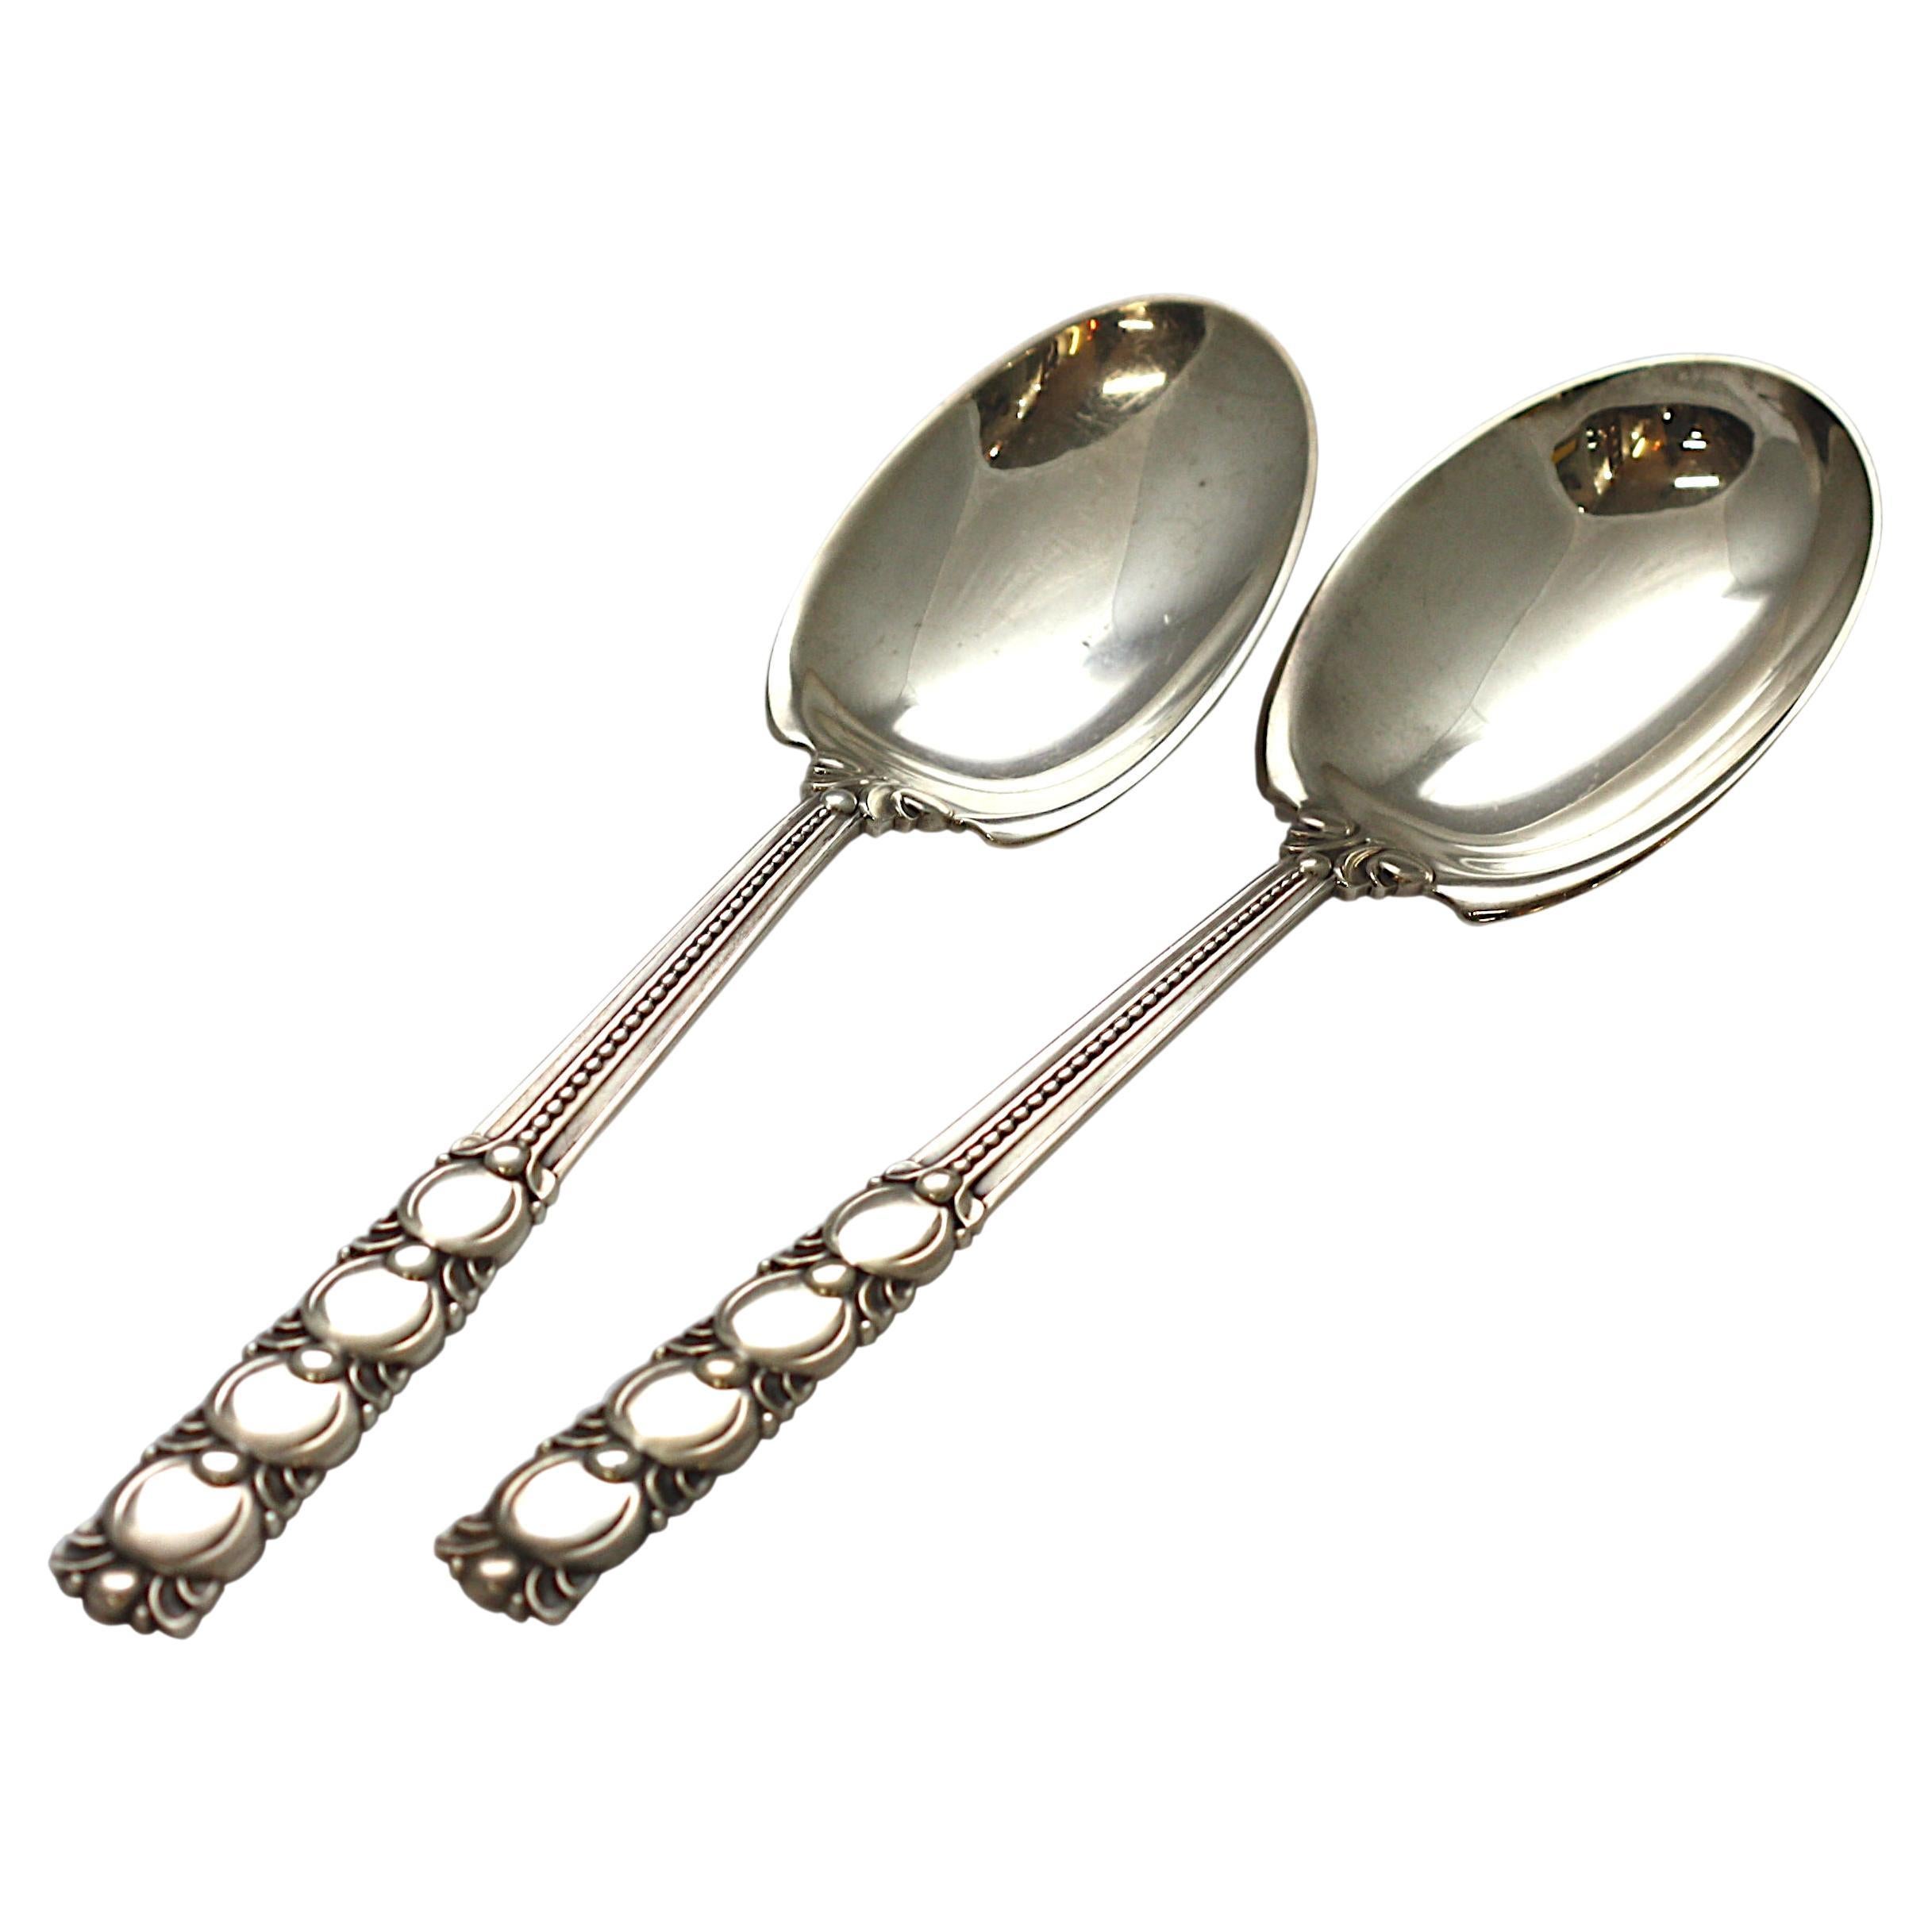 Pair of Tiffany & C0. Sterling Silver Serving Spoons